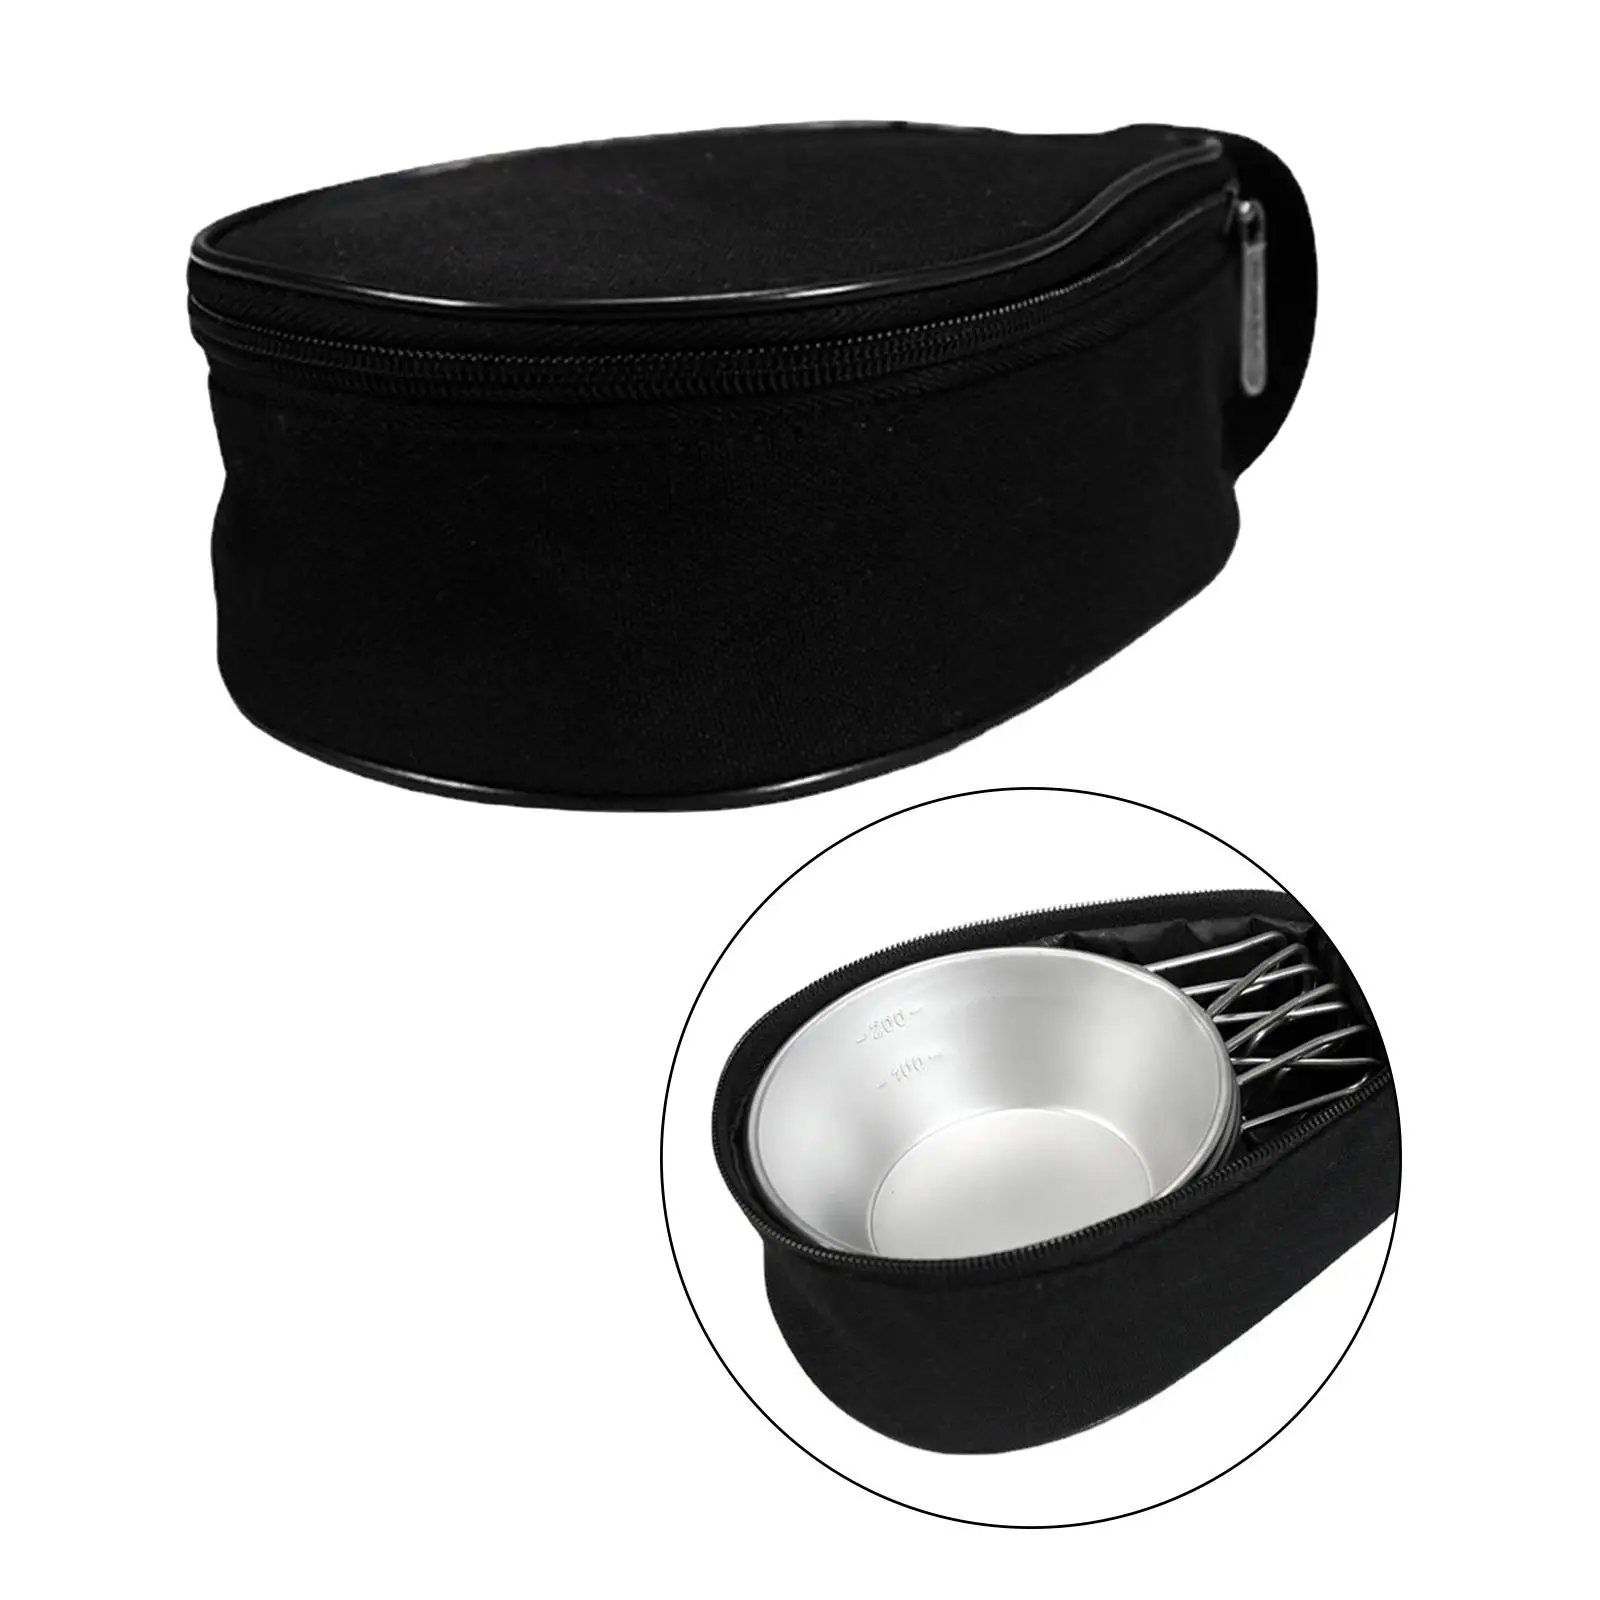 Tableware Bowl Bag Carry Case Activities Reusable Flatware Organizer Carrier Container Dinnerware for Outdoor Barbecue Equipment